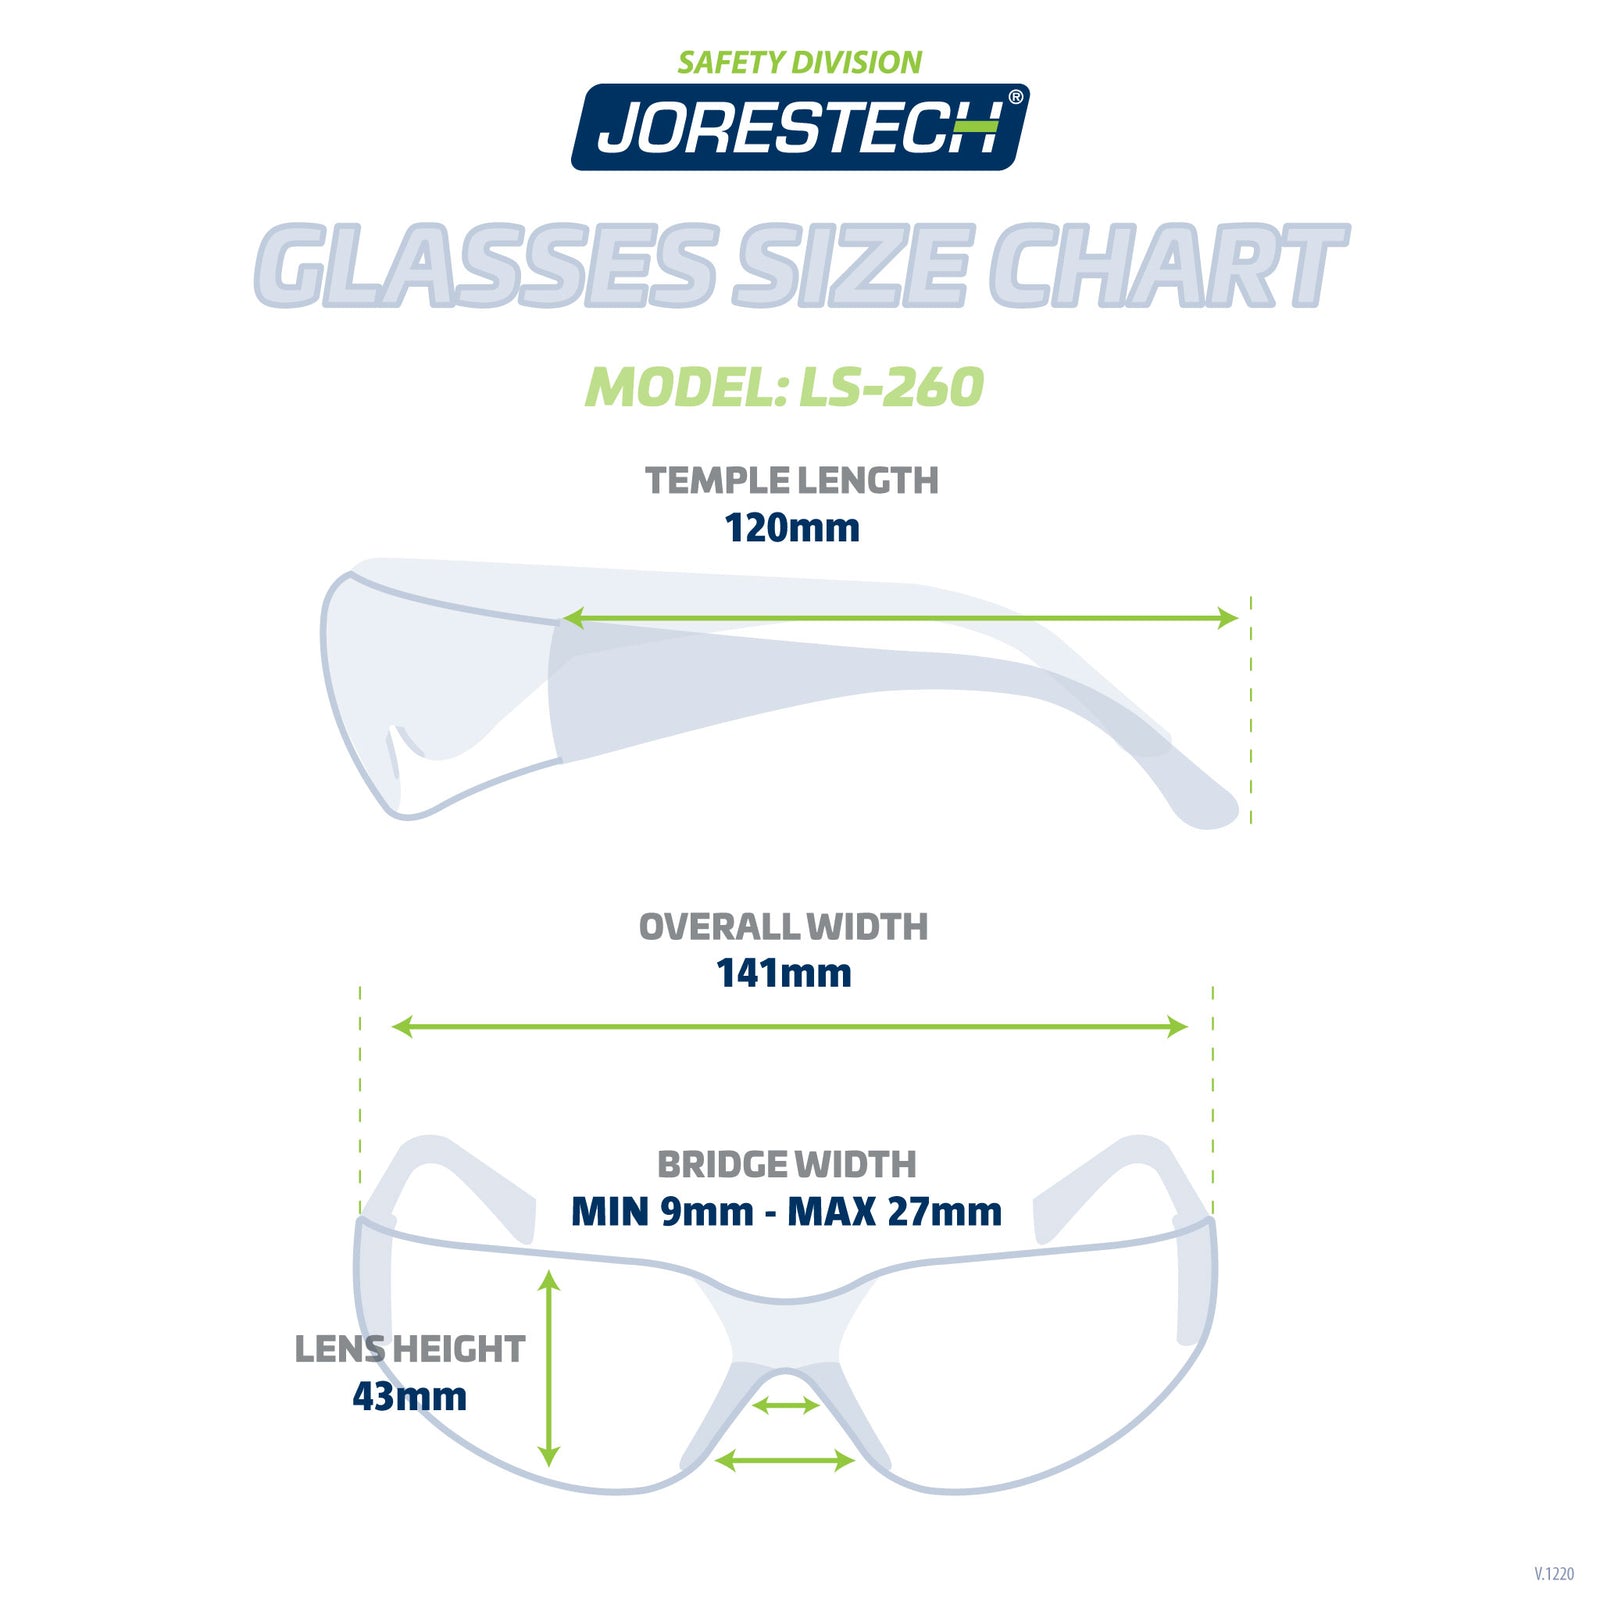 Measurements of JORESTECH Safety Glasses for High Impact Protection